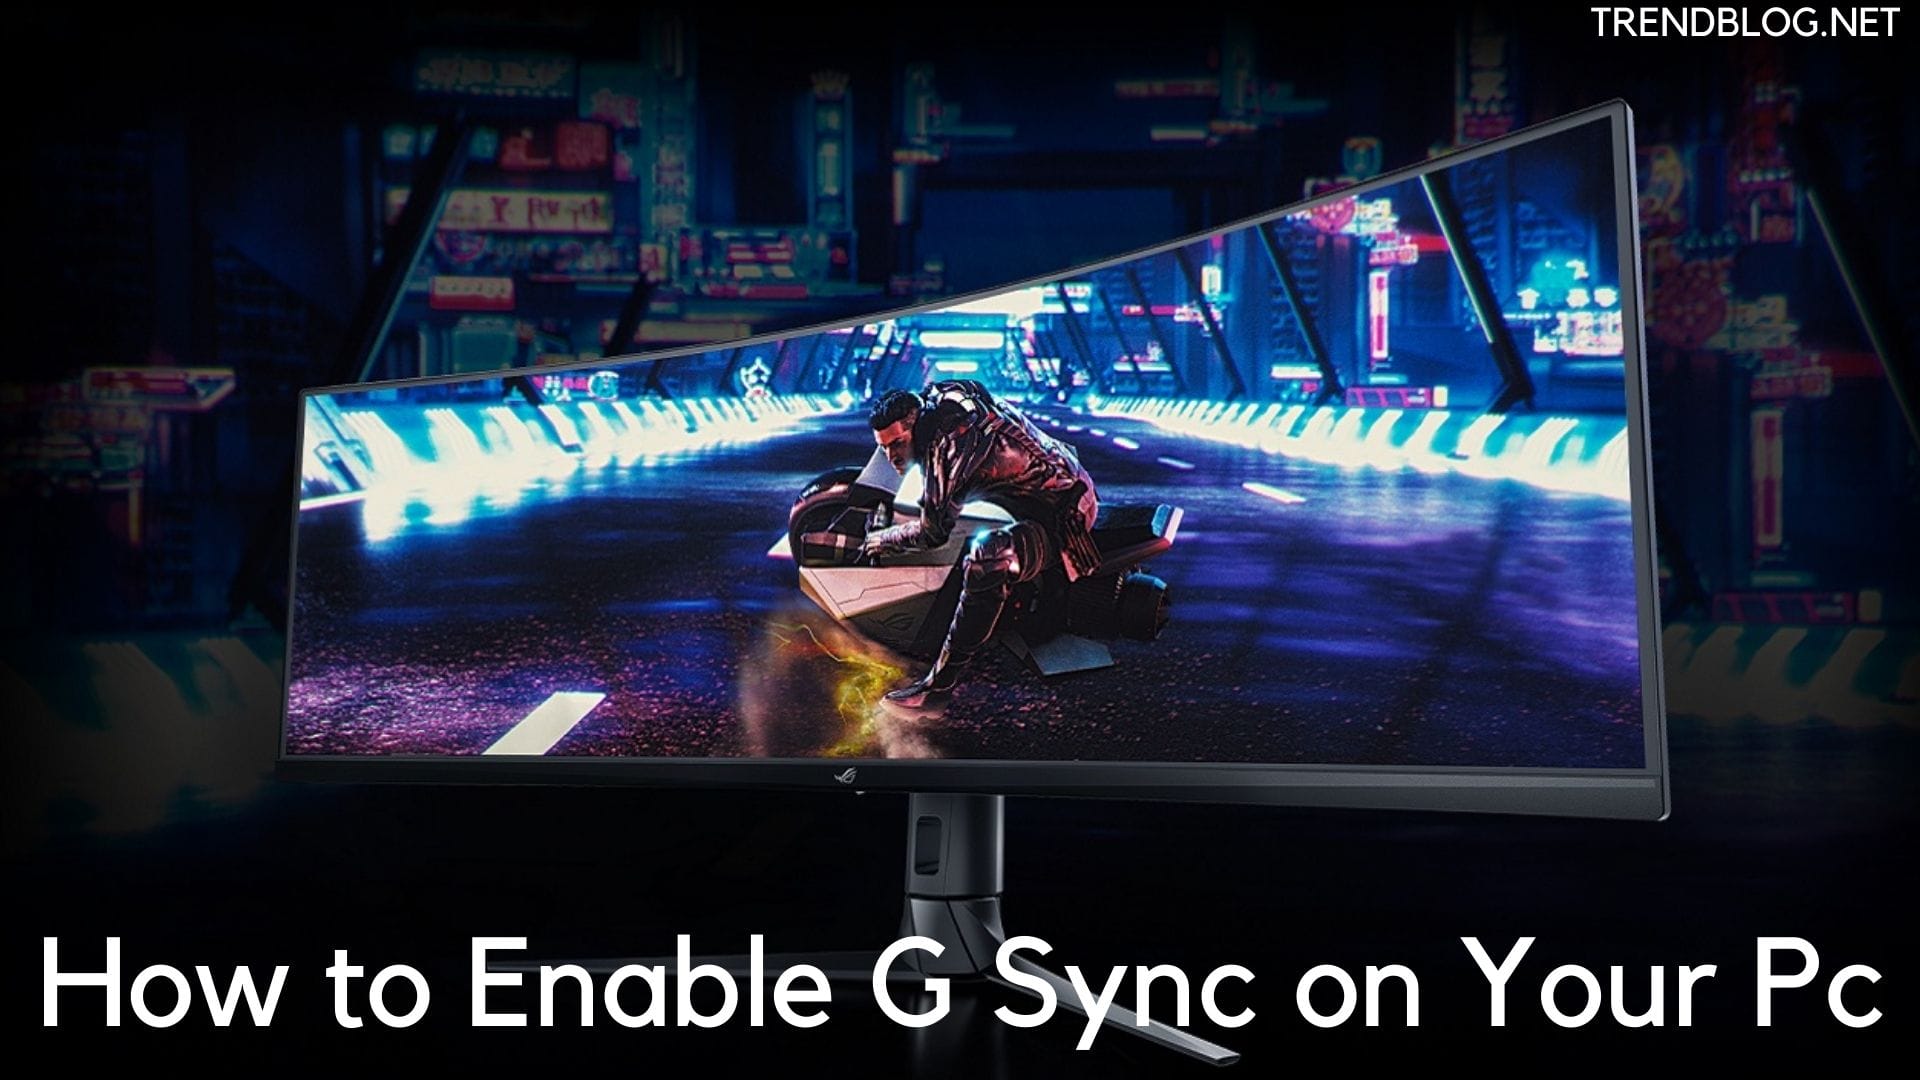  How to Enable G Sync on Your Pc Within Minutes